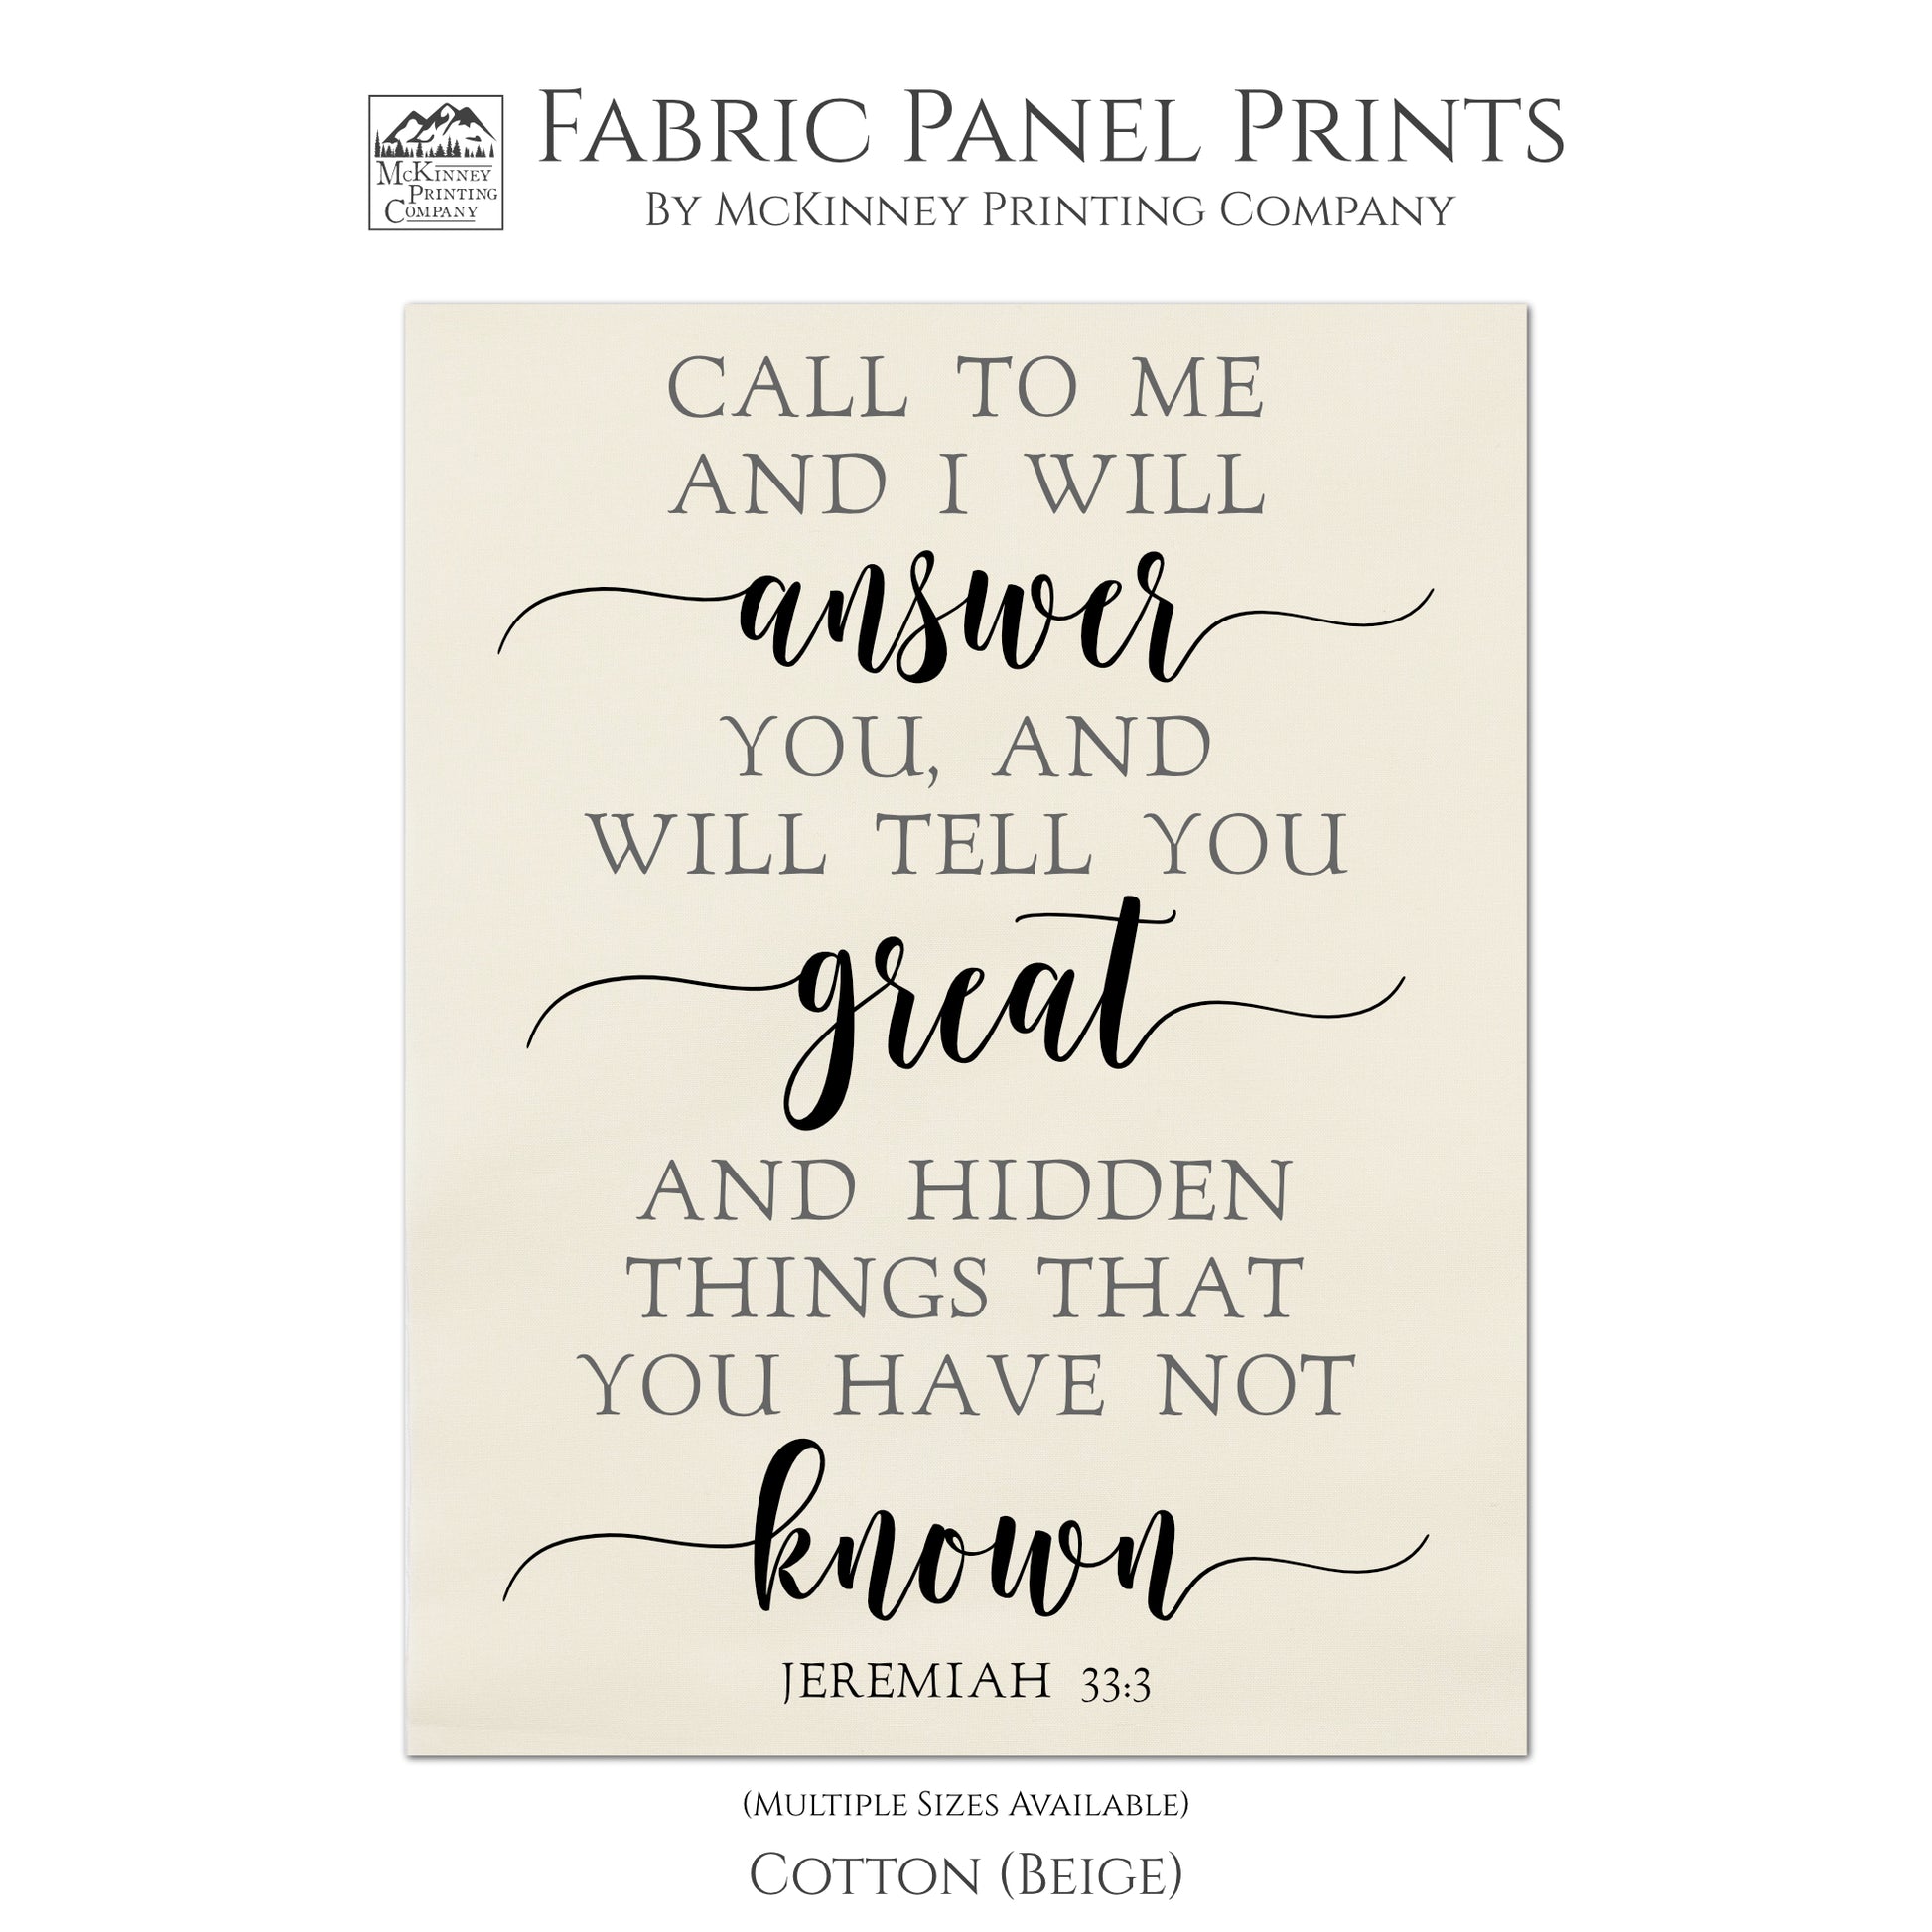 Call to me and I will answer you, and will tell you great and hidden things that you have not known. - Jeremiah 33:3, Quilt Block, Fabric Panel Print, Scripture Fabric - Cotton